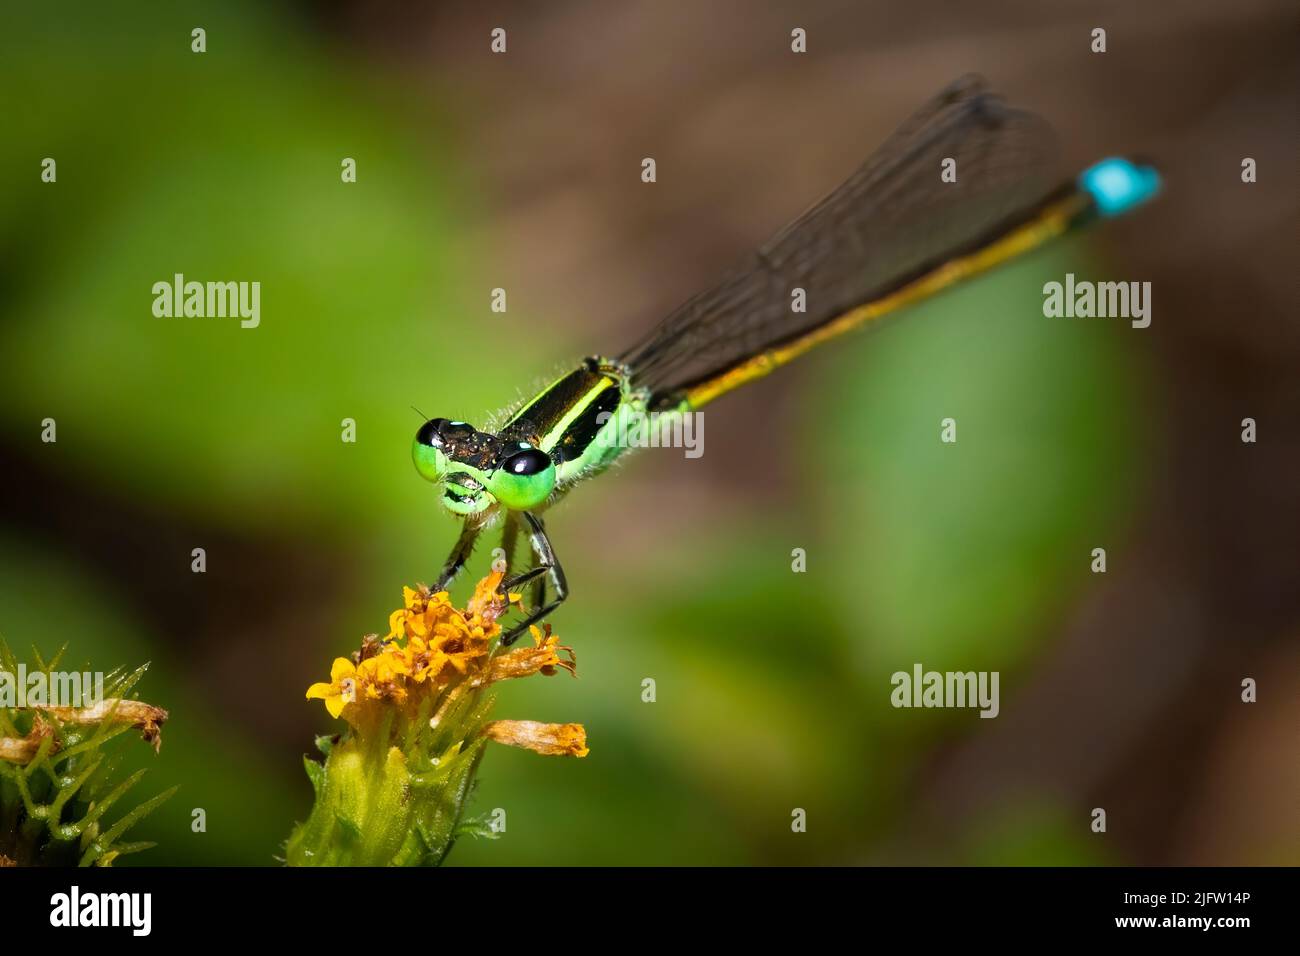 A macro photo of a damselfly as it perches on a flower in a tropical garden in Fort Lauderdale, Florida. Stock Photo